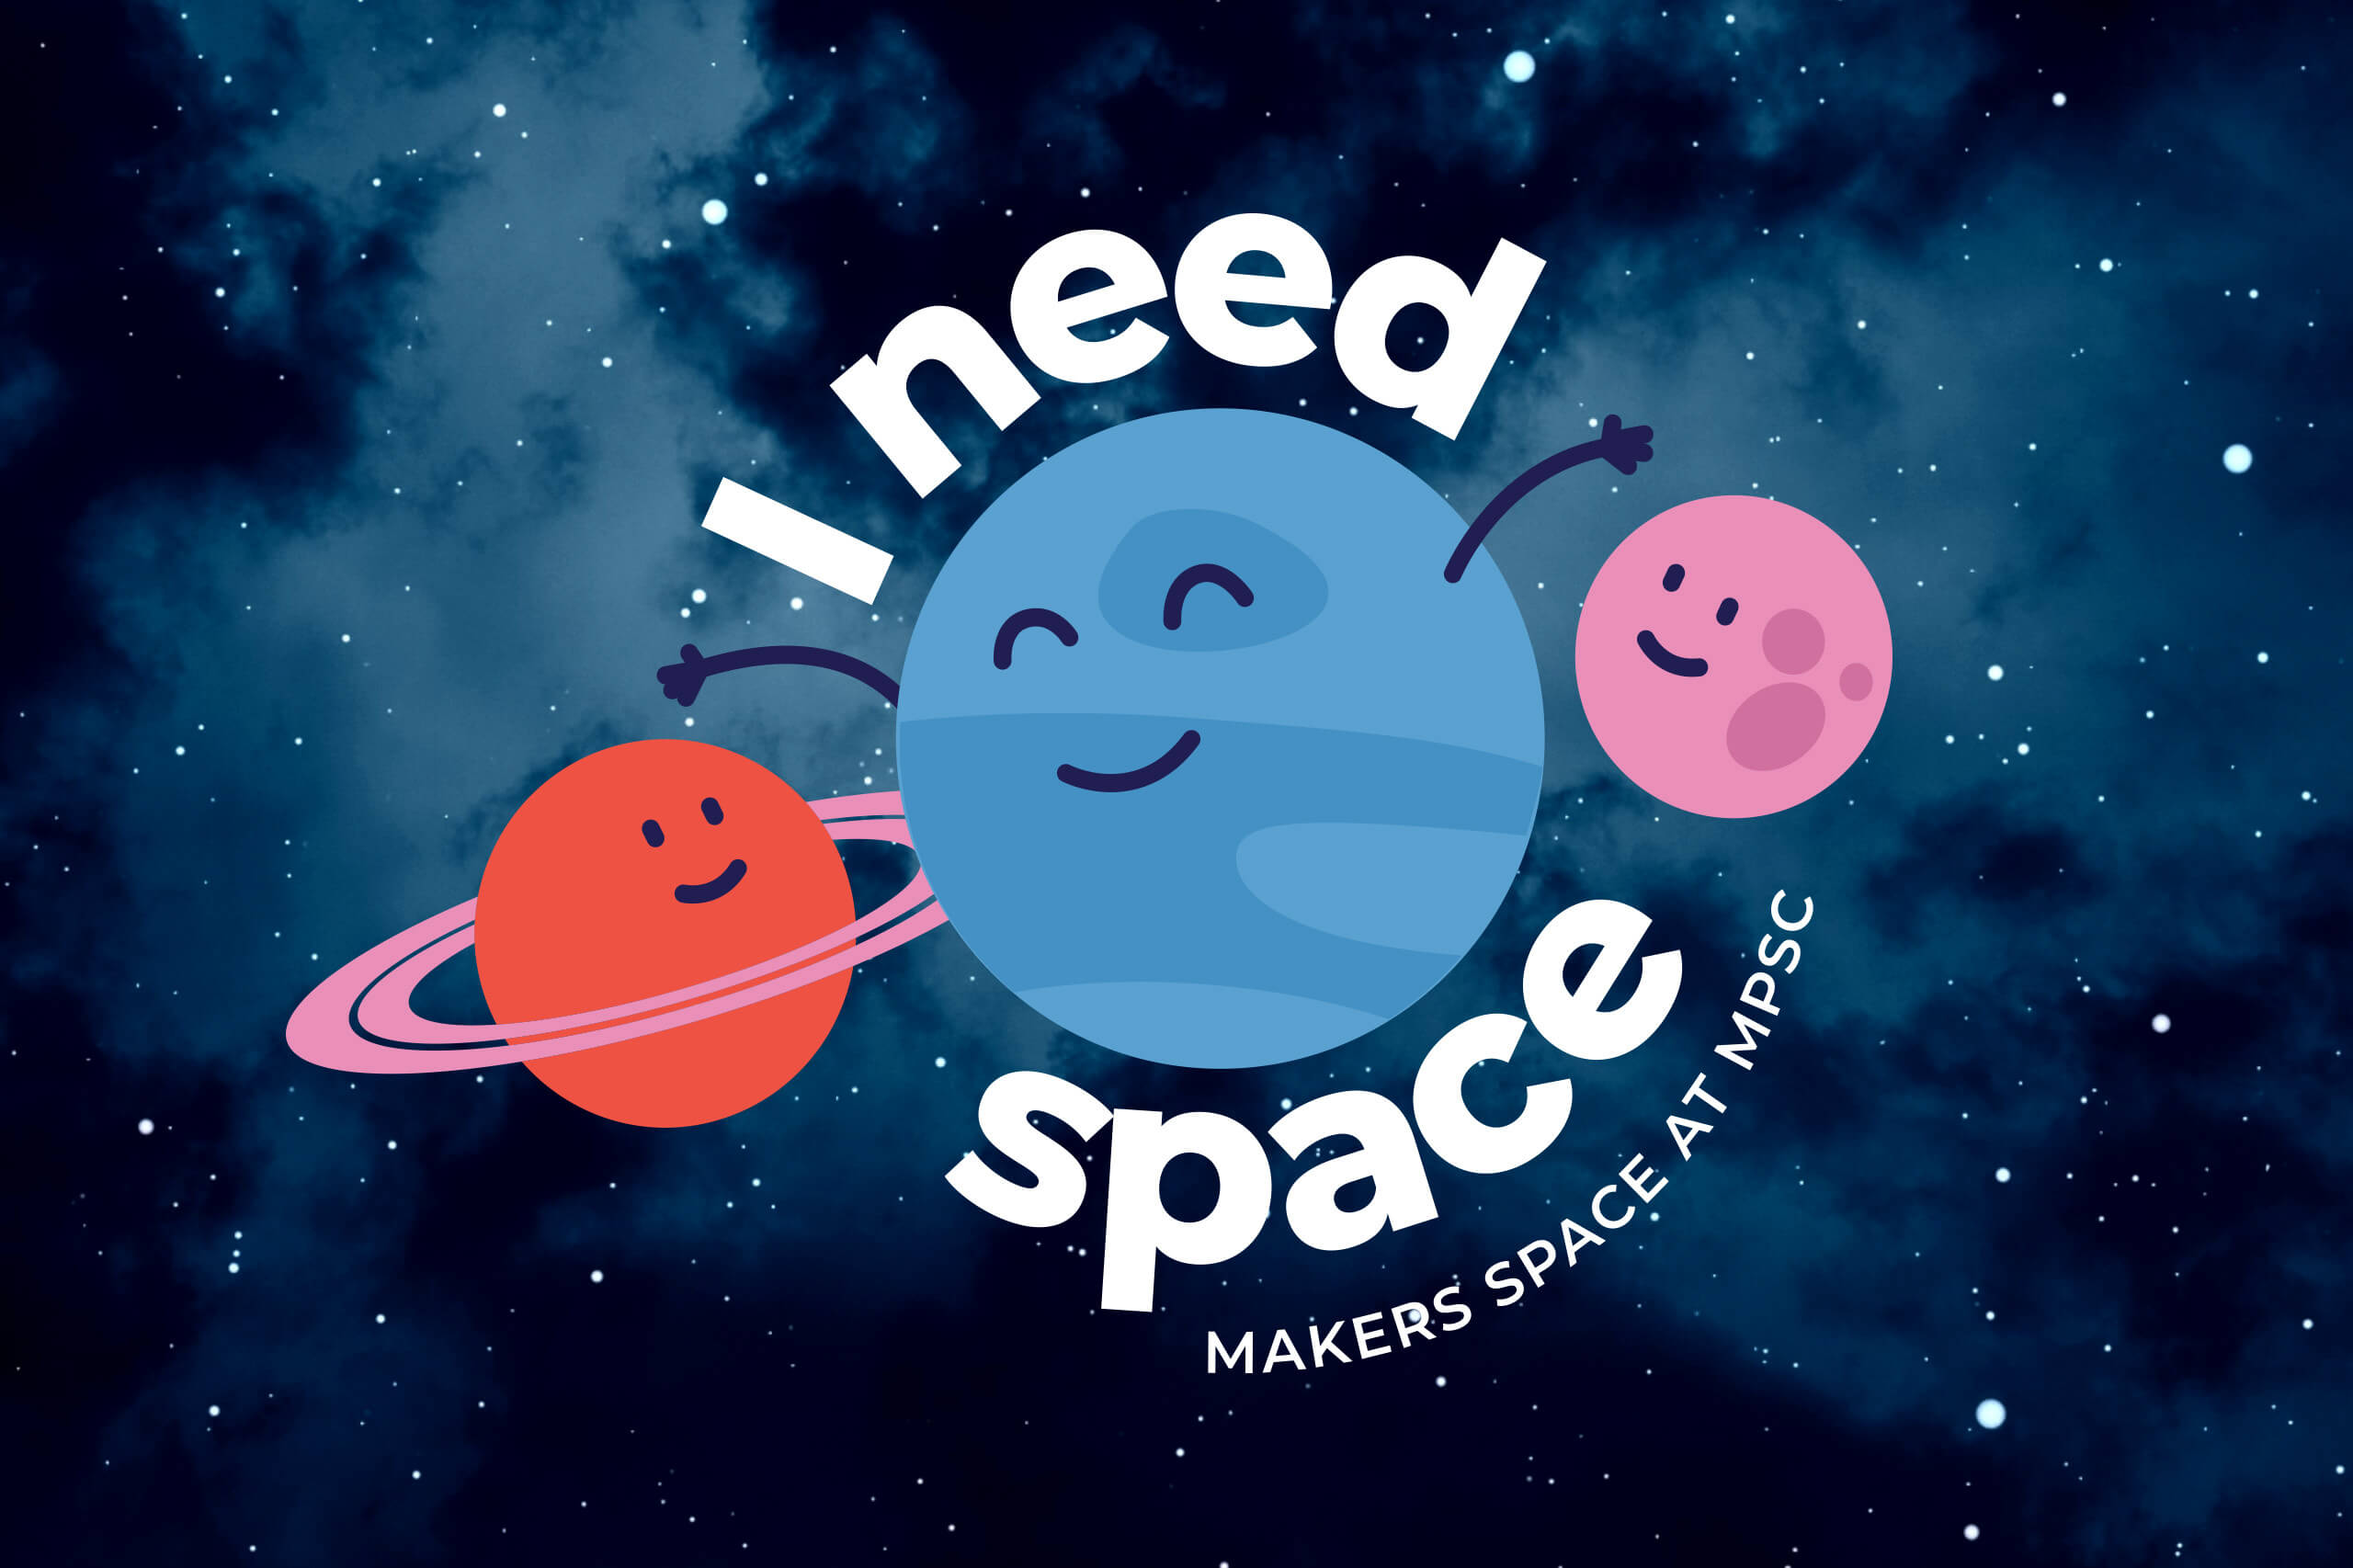 I need space. Makers space at mpsc